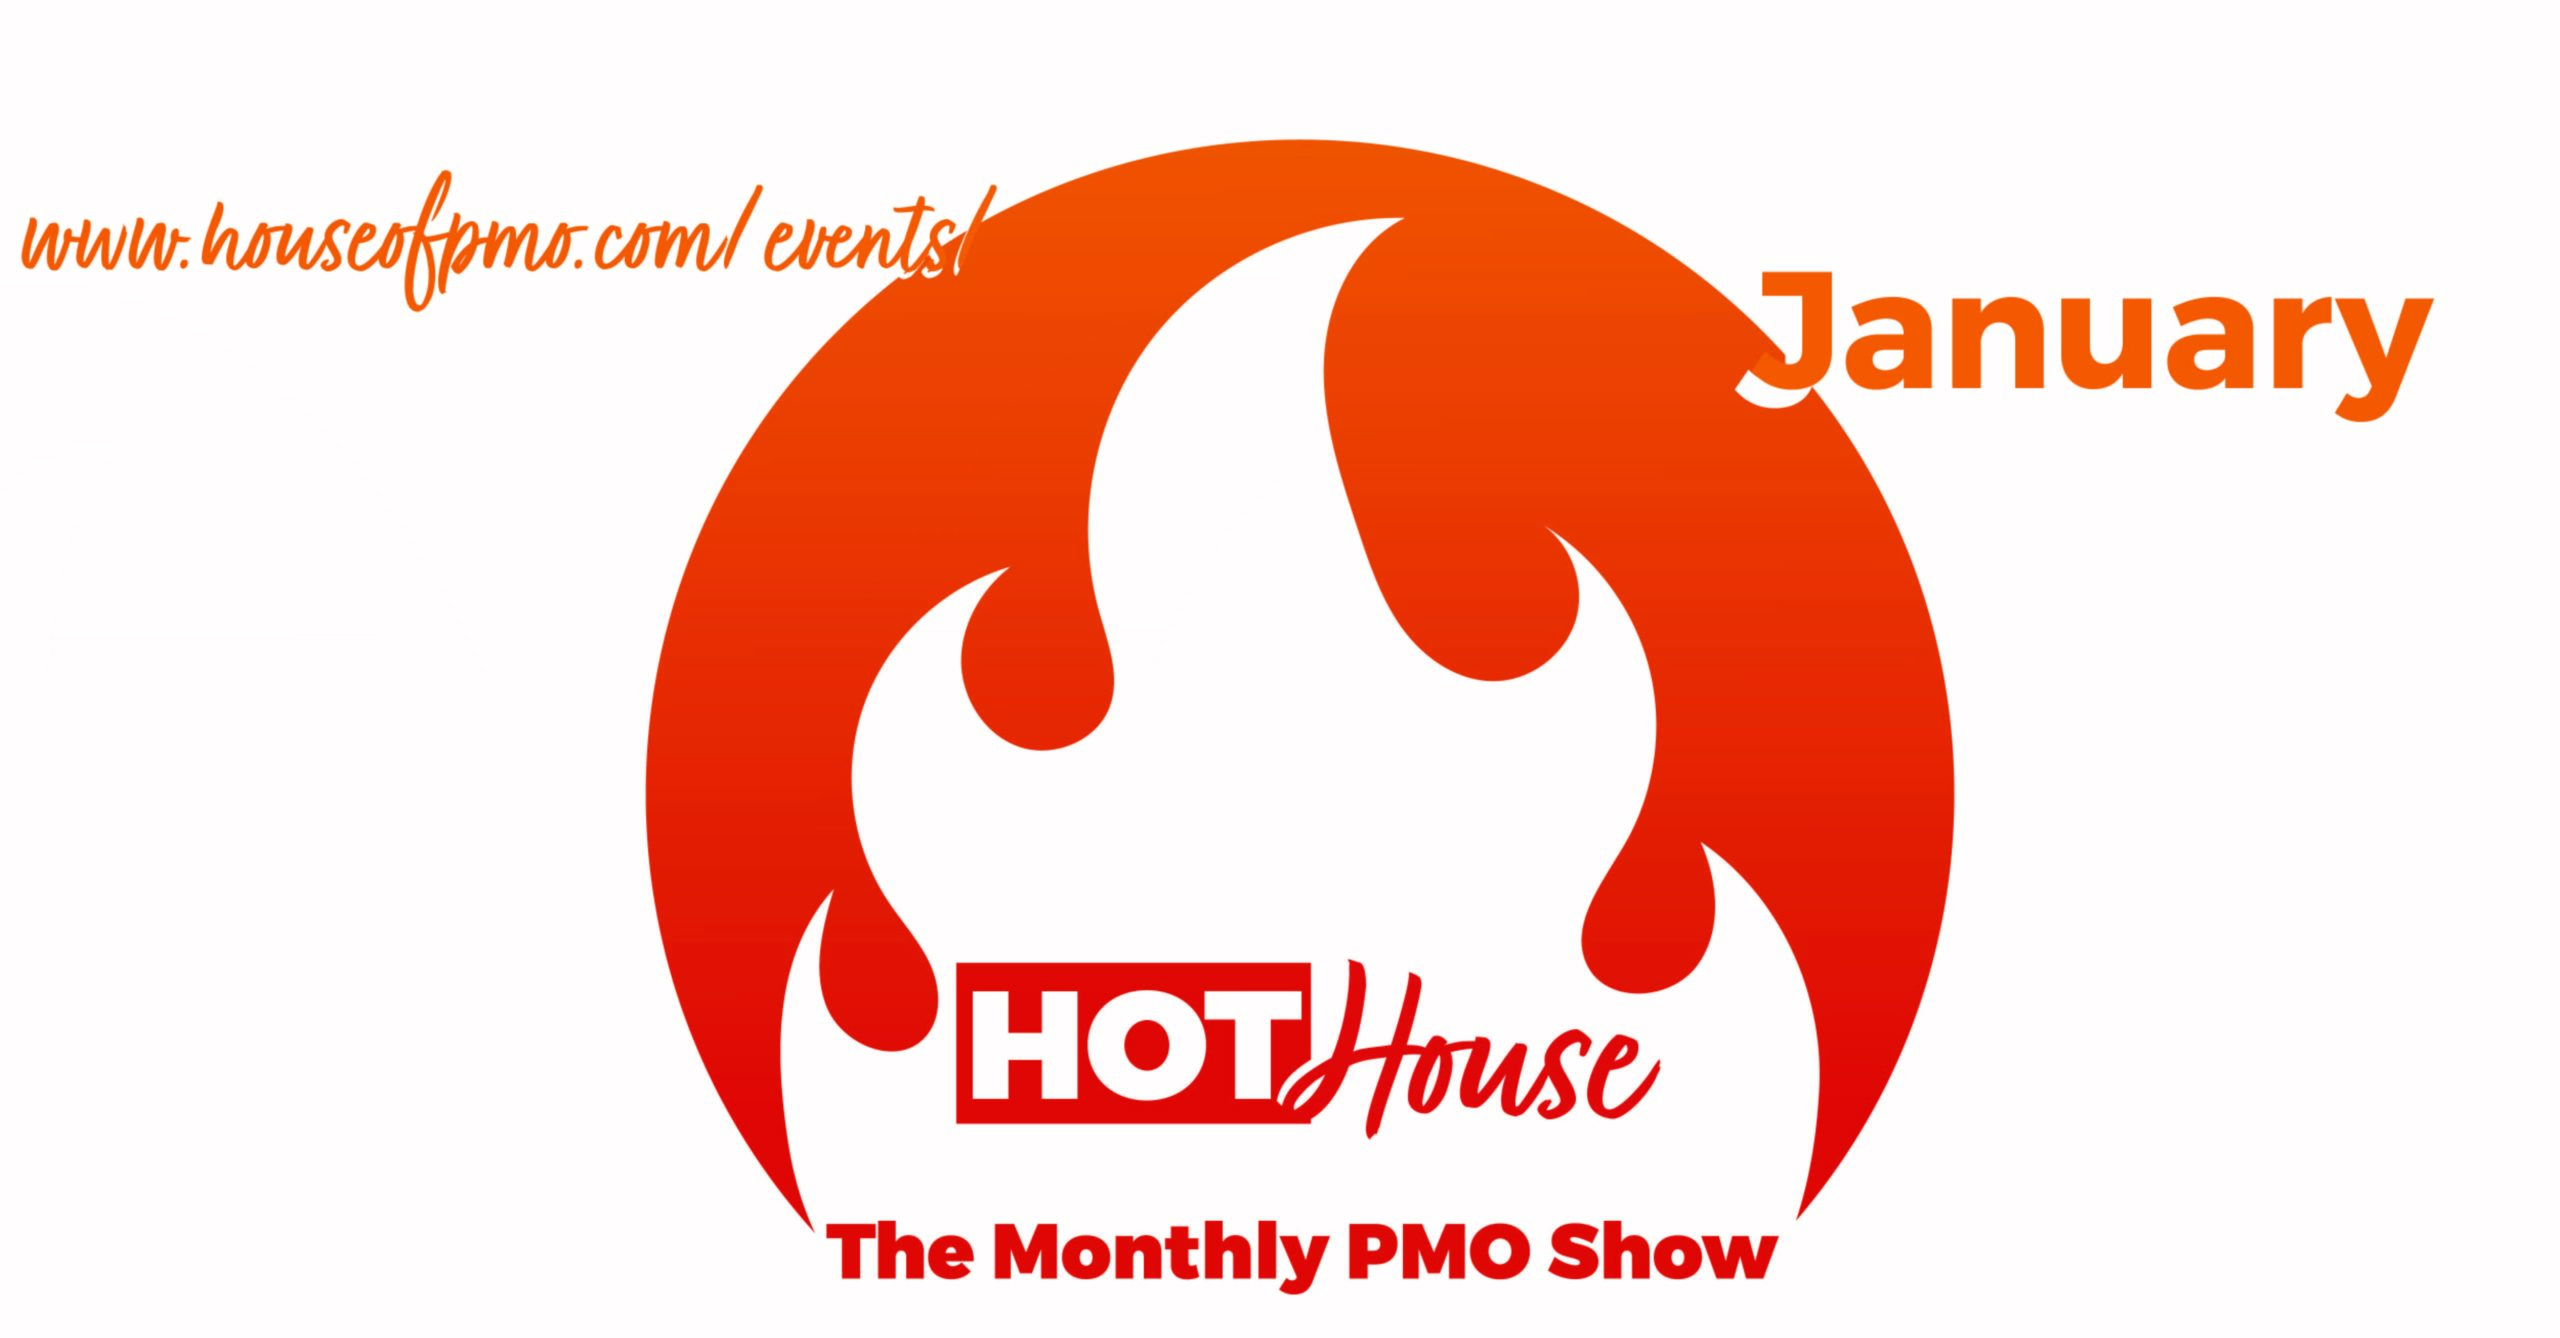 Event image for PMO Hot House January